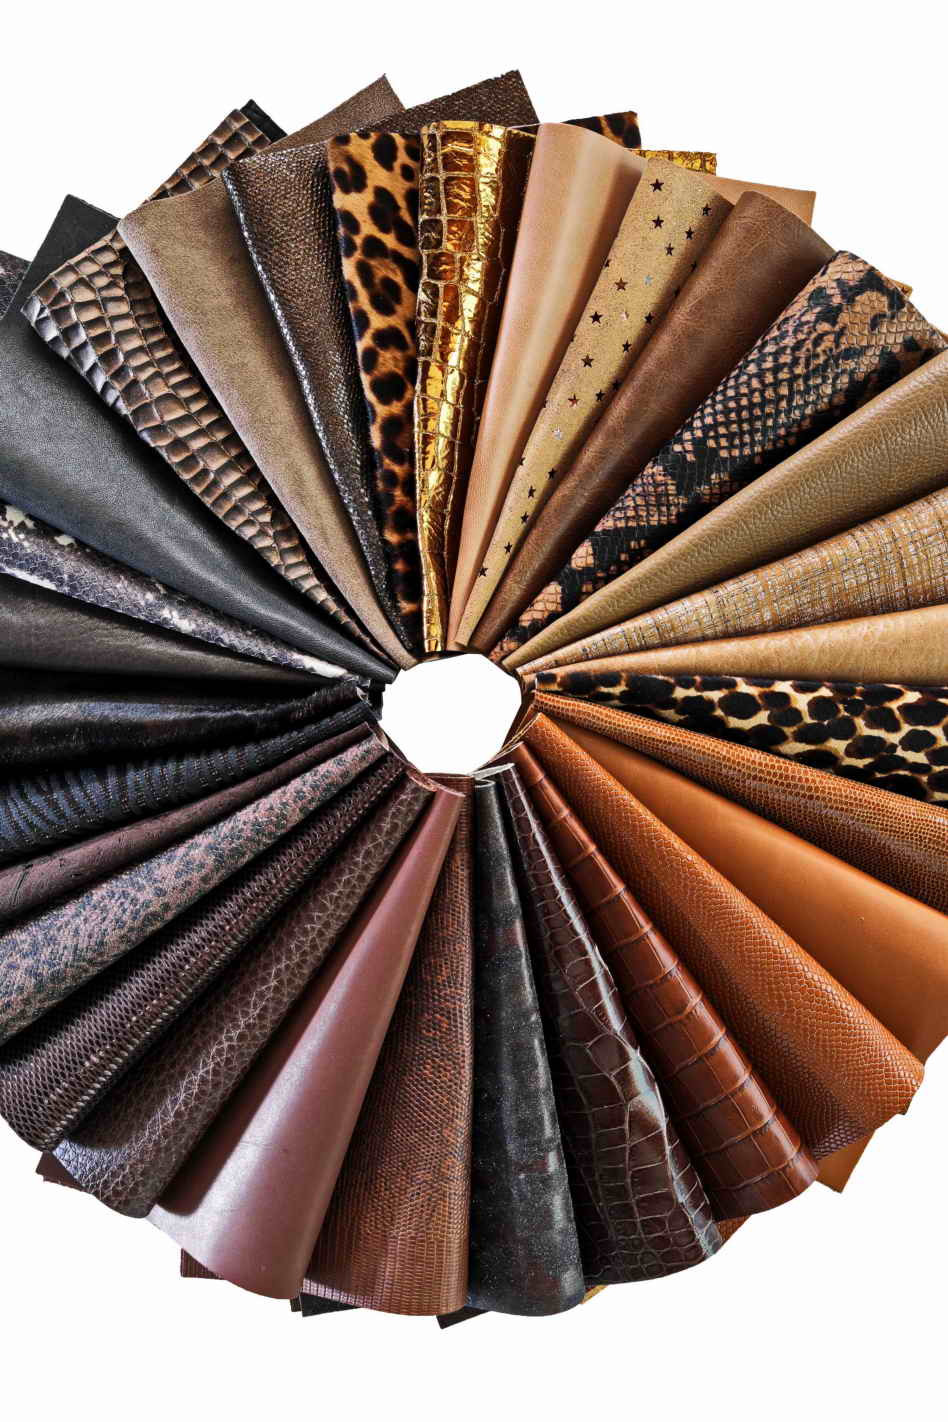 Metallic Leather Fabric, Faux Leather Sheets